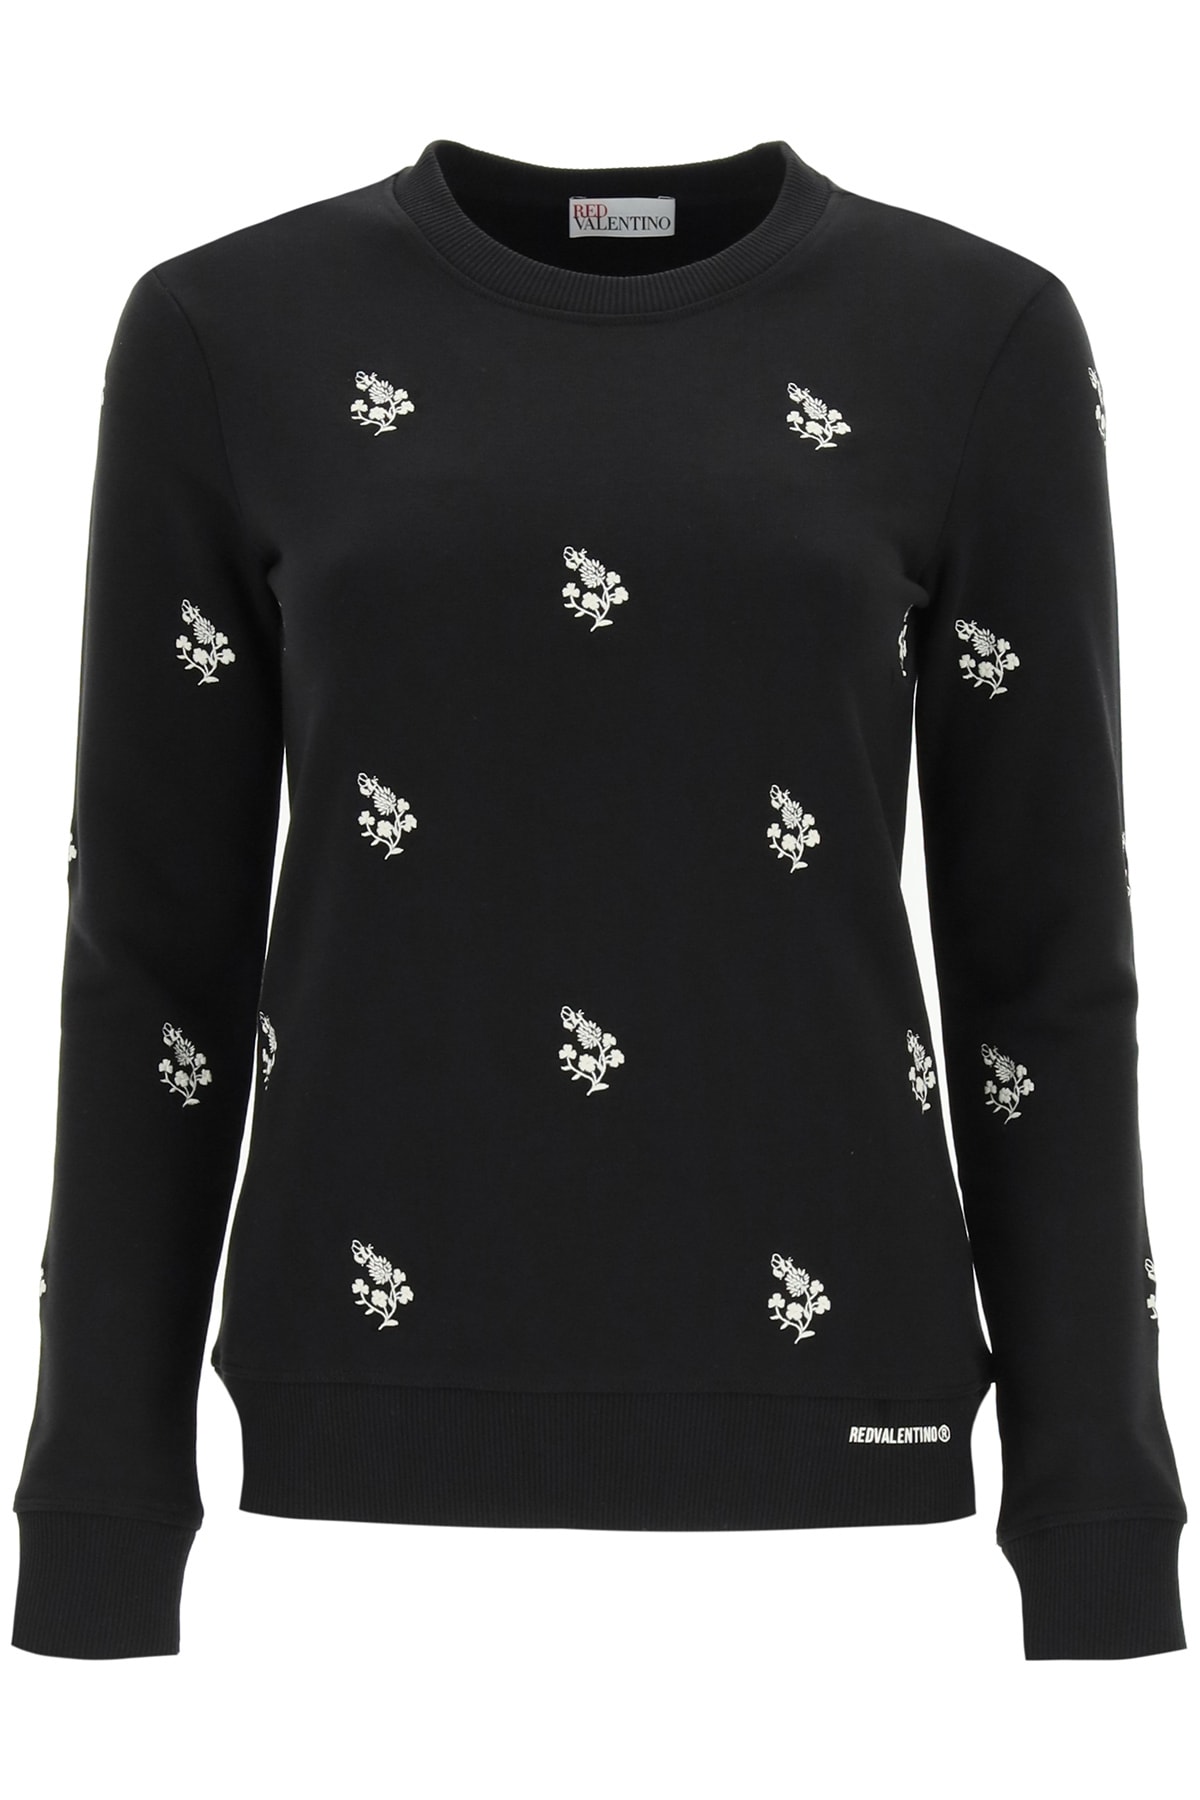 RED Valentino Sweatshirt With Clover Embroidery